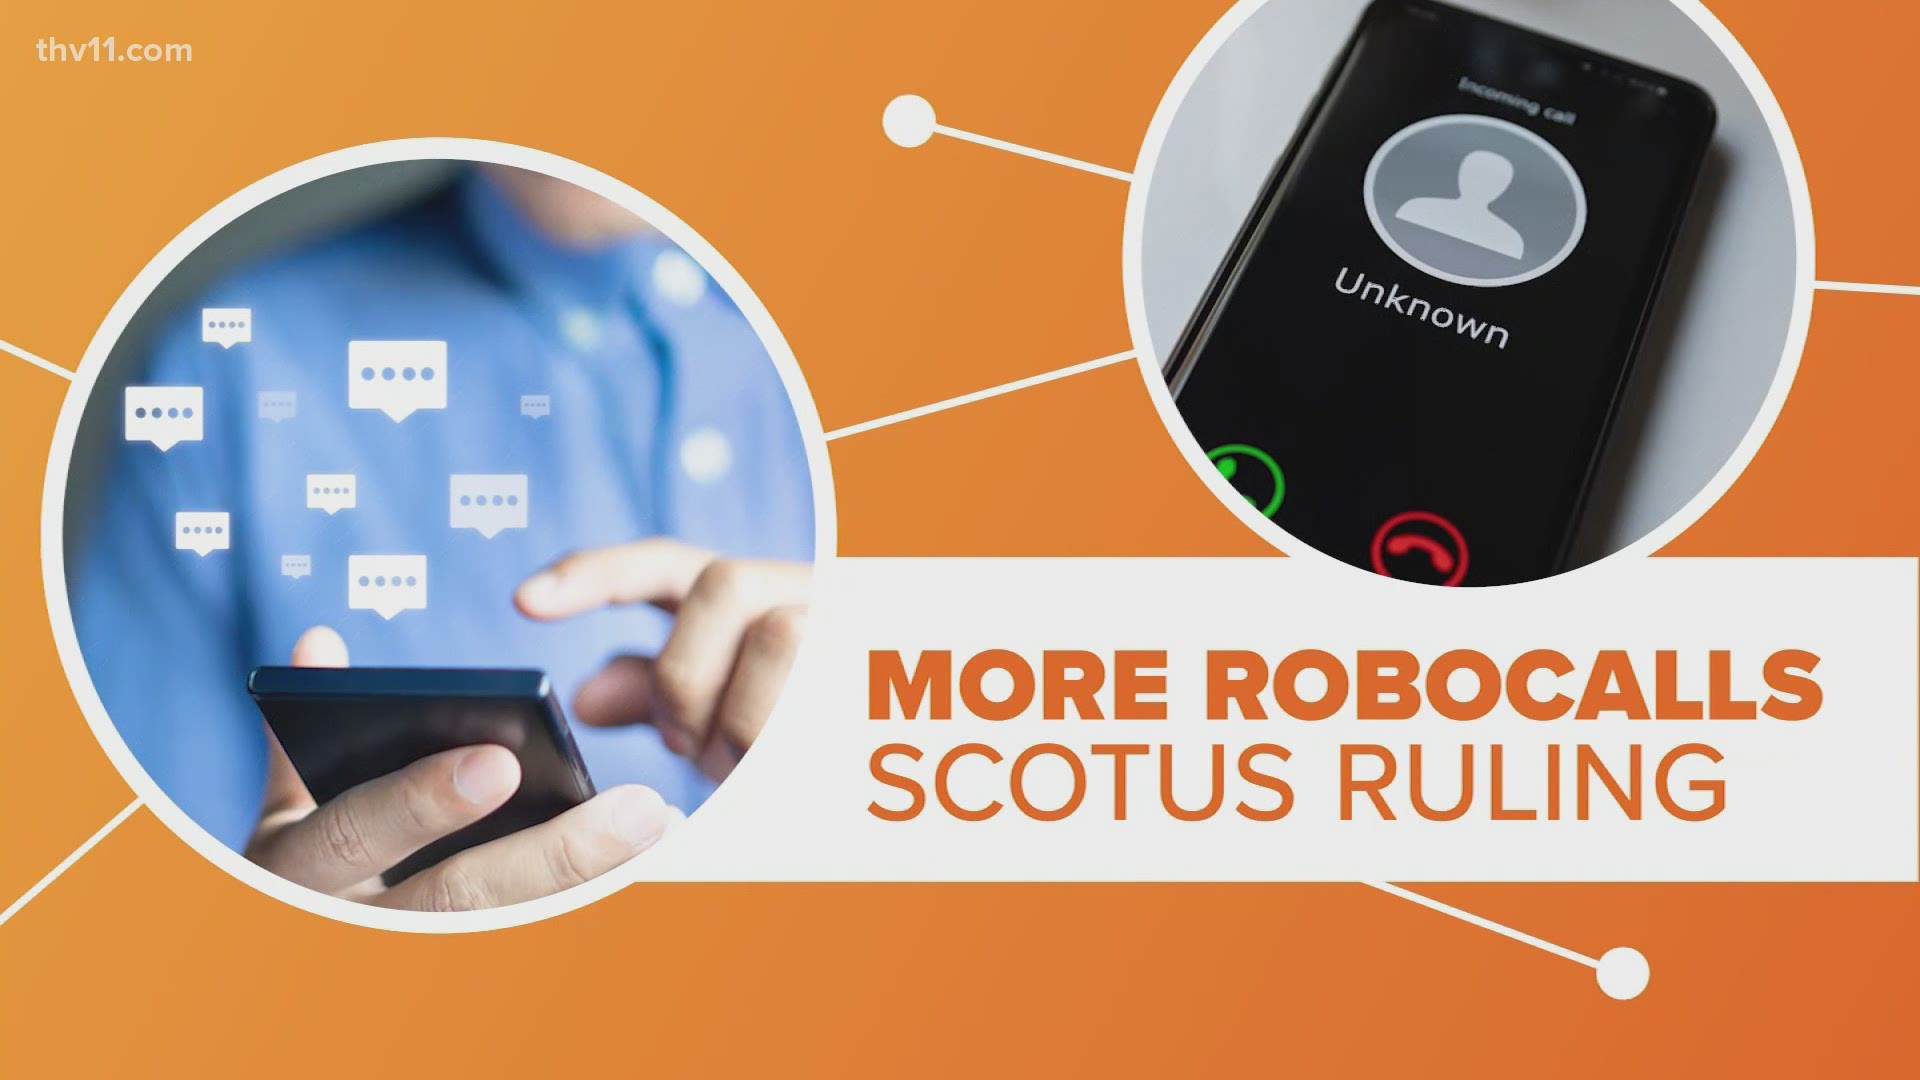 You'd be hard-pressed to find anybody who likes robocalls, but unfortunately you could soon be getting more of them.